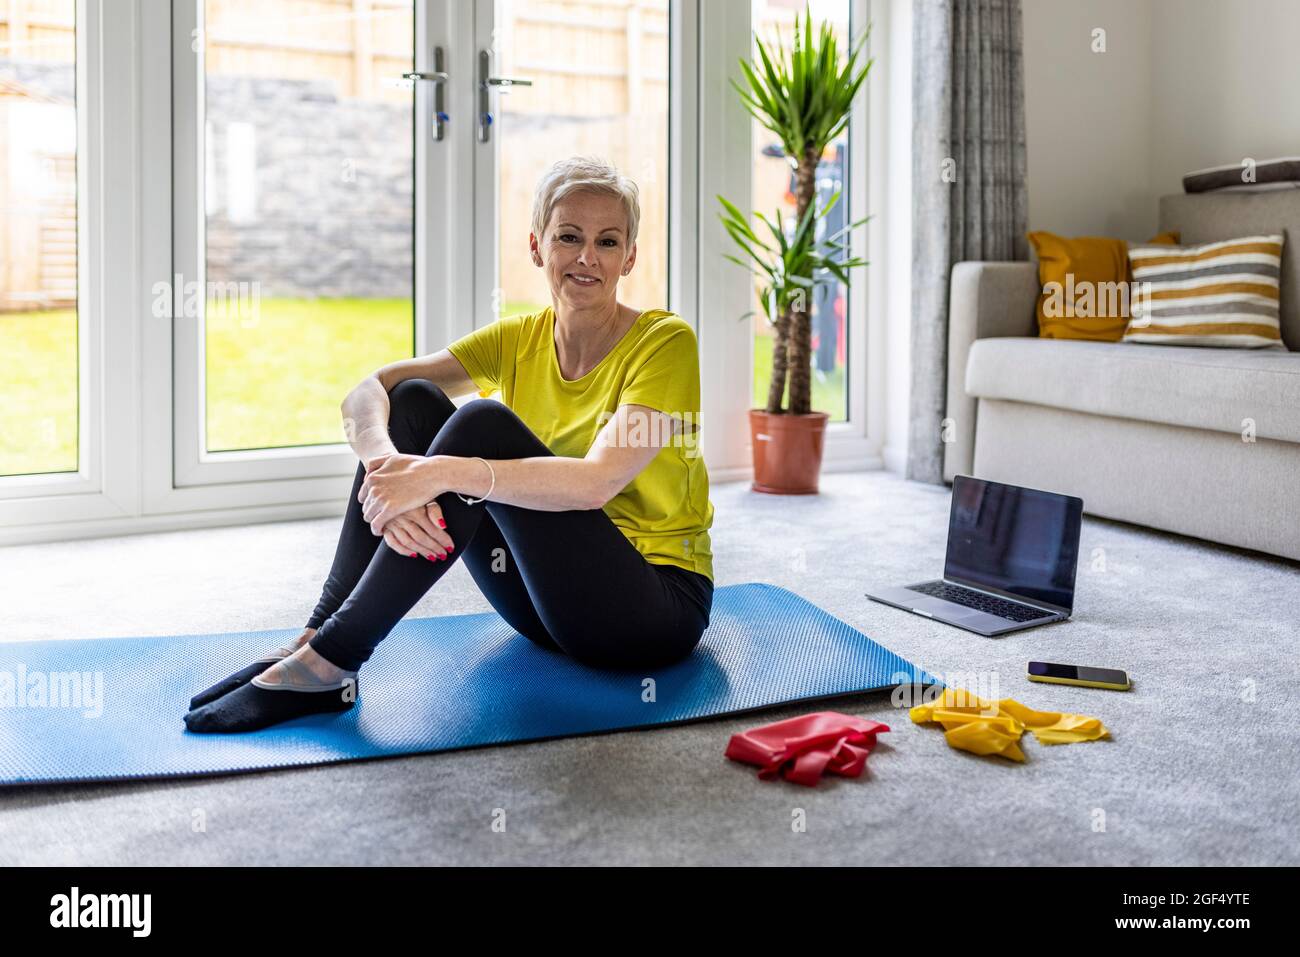 Mature woman sitting on exercise mat at home Stock Photo